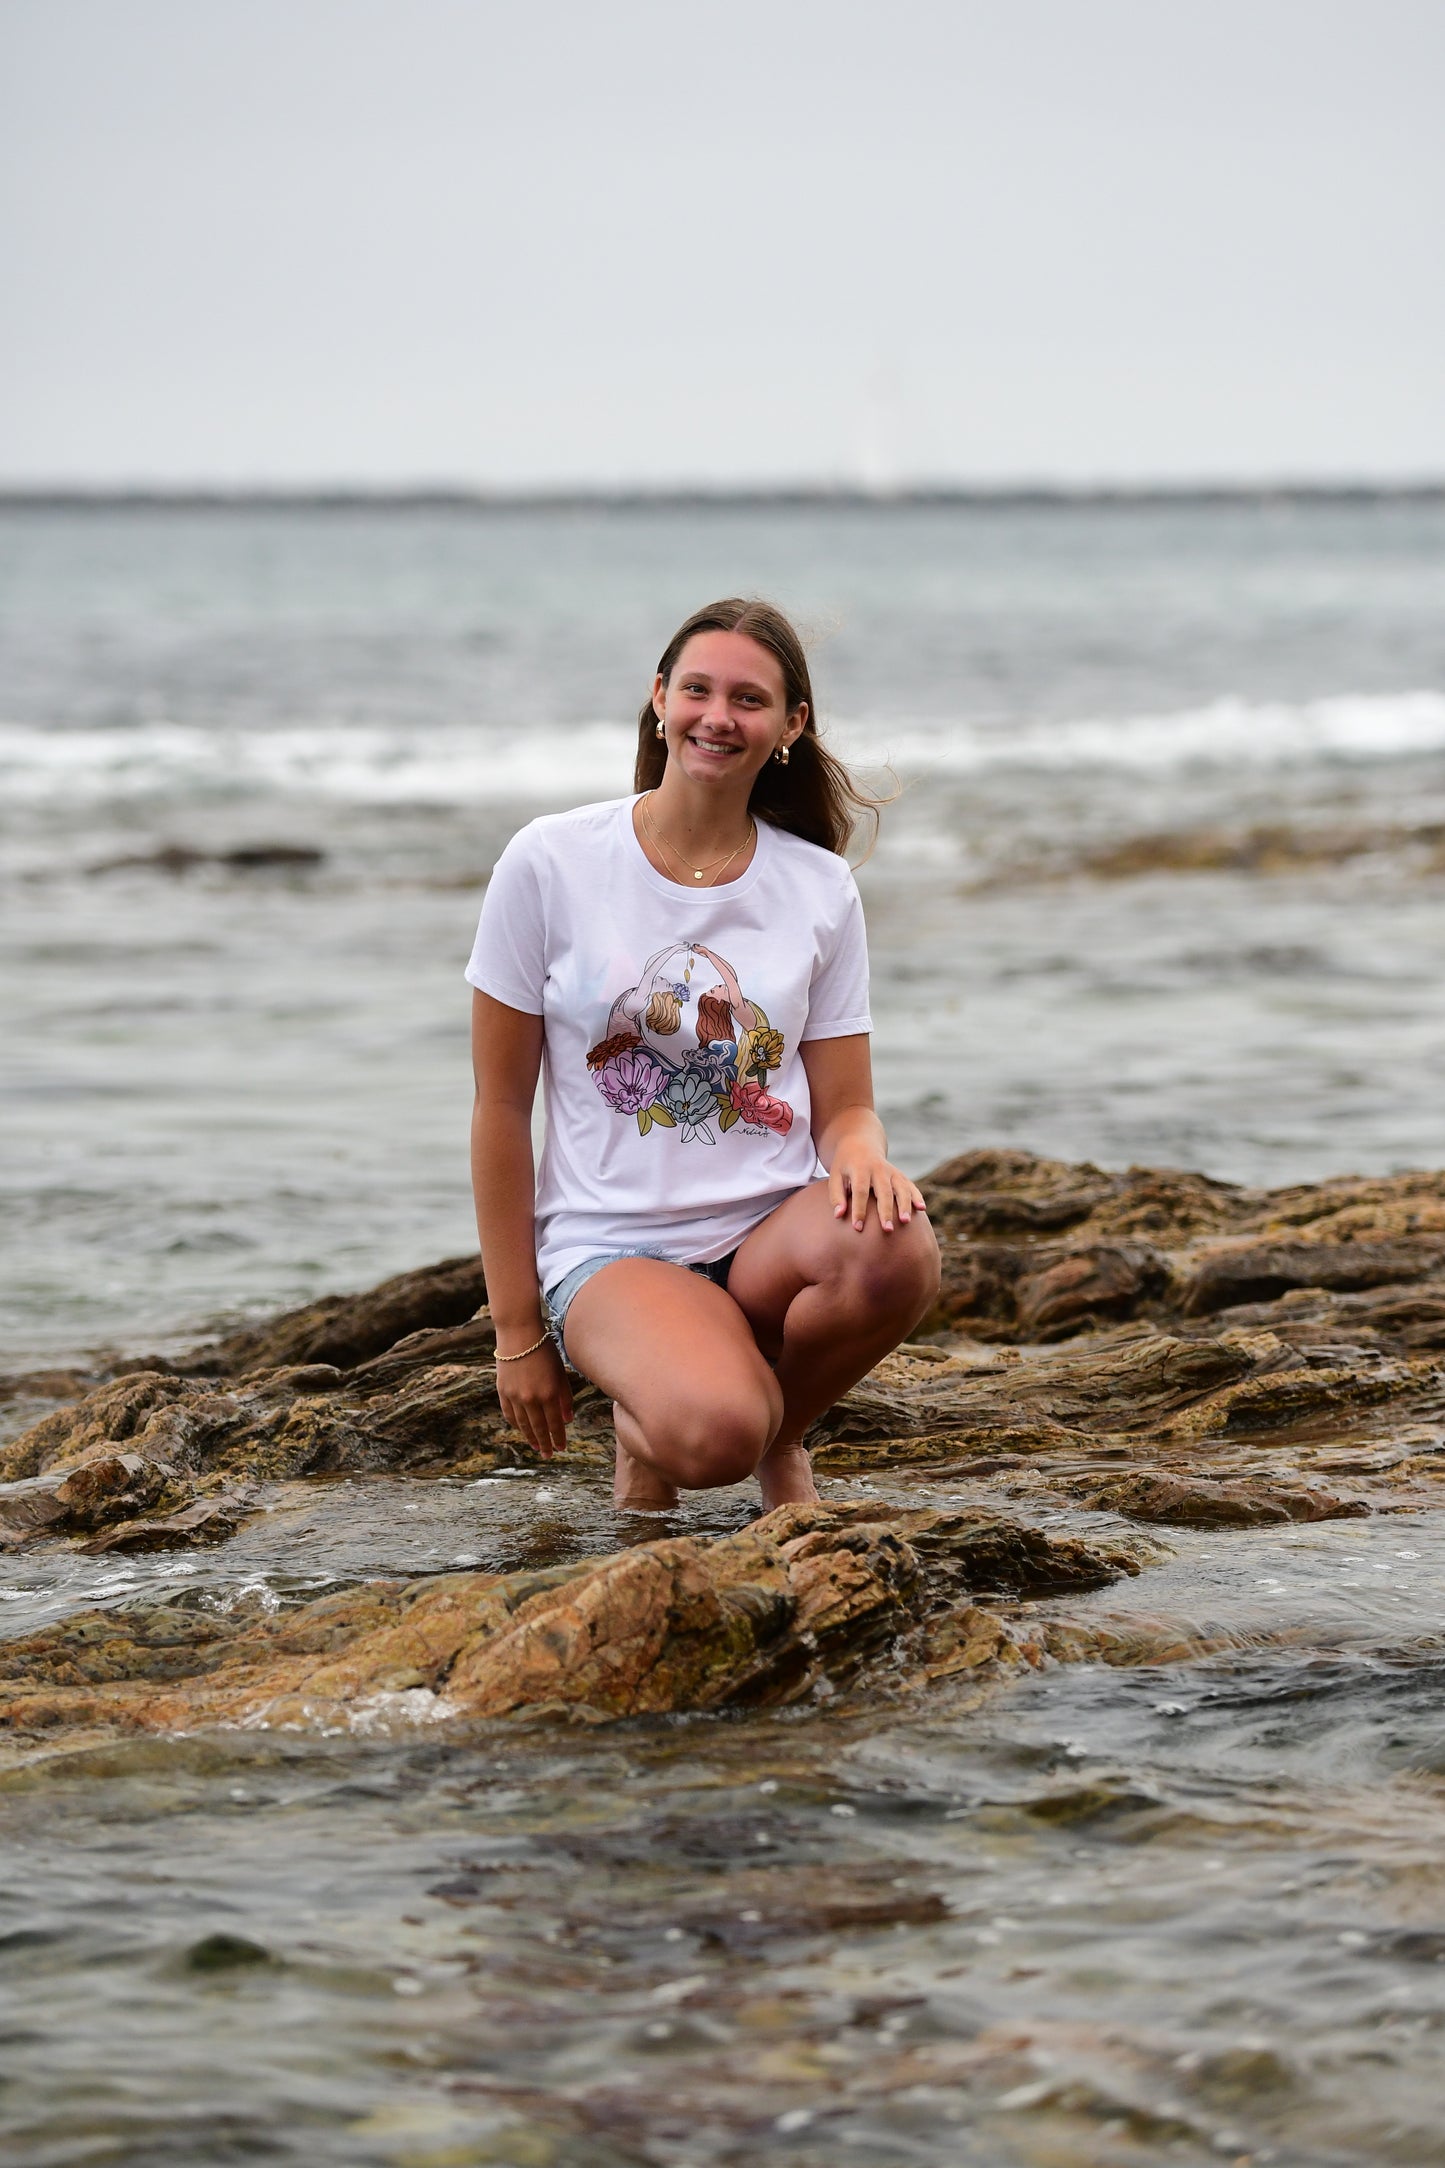 SEASTERS mermaids floral had-drawn graphic design artist's t-shirt for women who like surfing, the beach and mermaids. Art by Nadia Watts